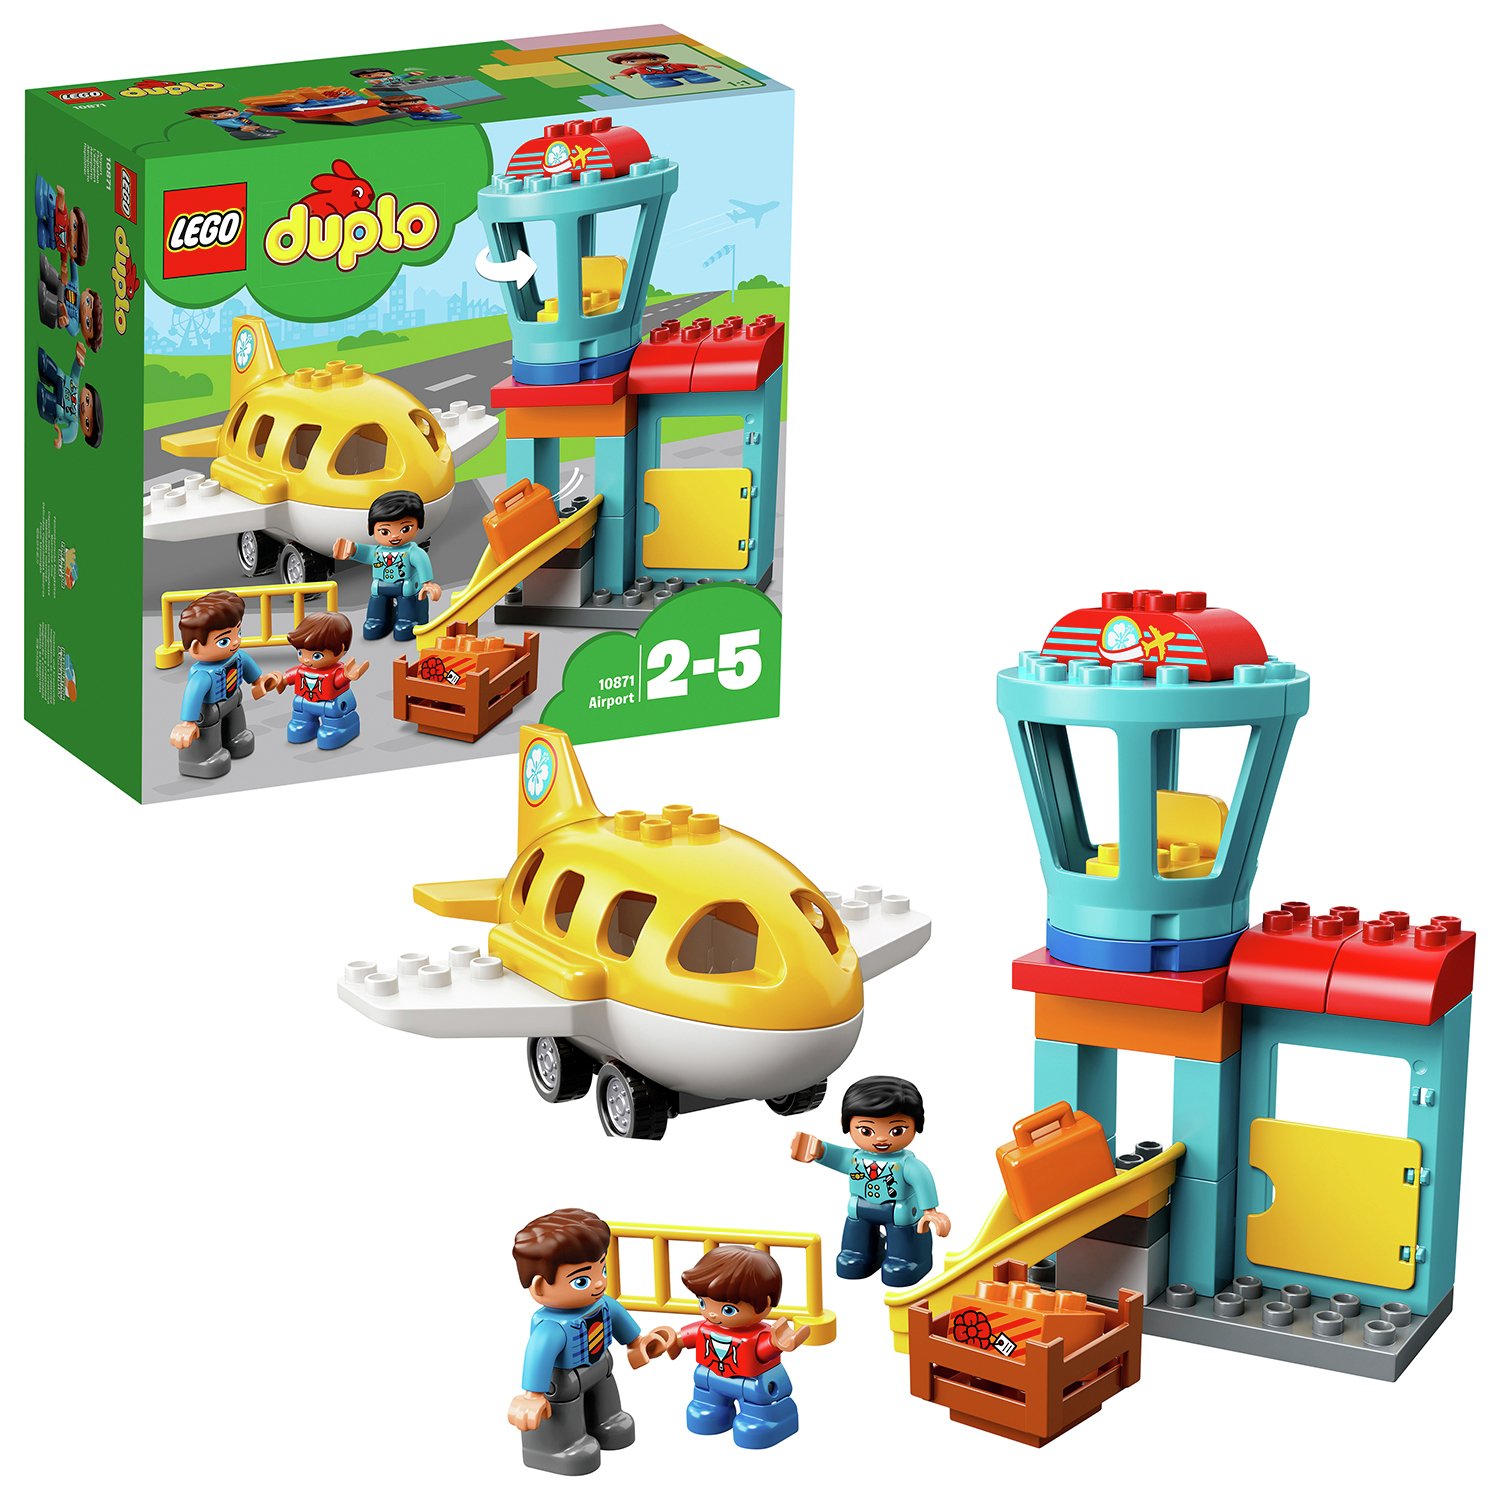 LEGO DUPLO My Town Airport and Airplane Toy - 10871